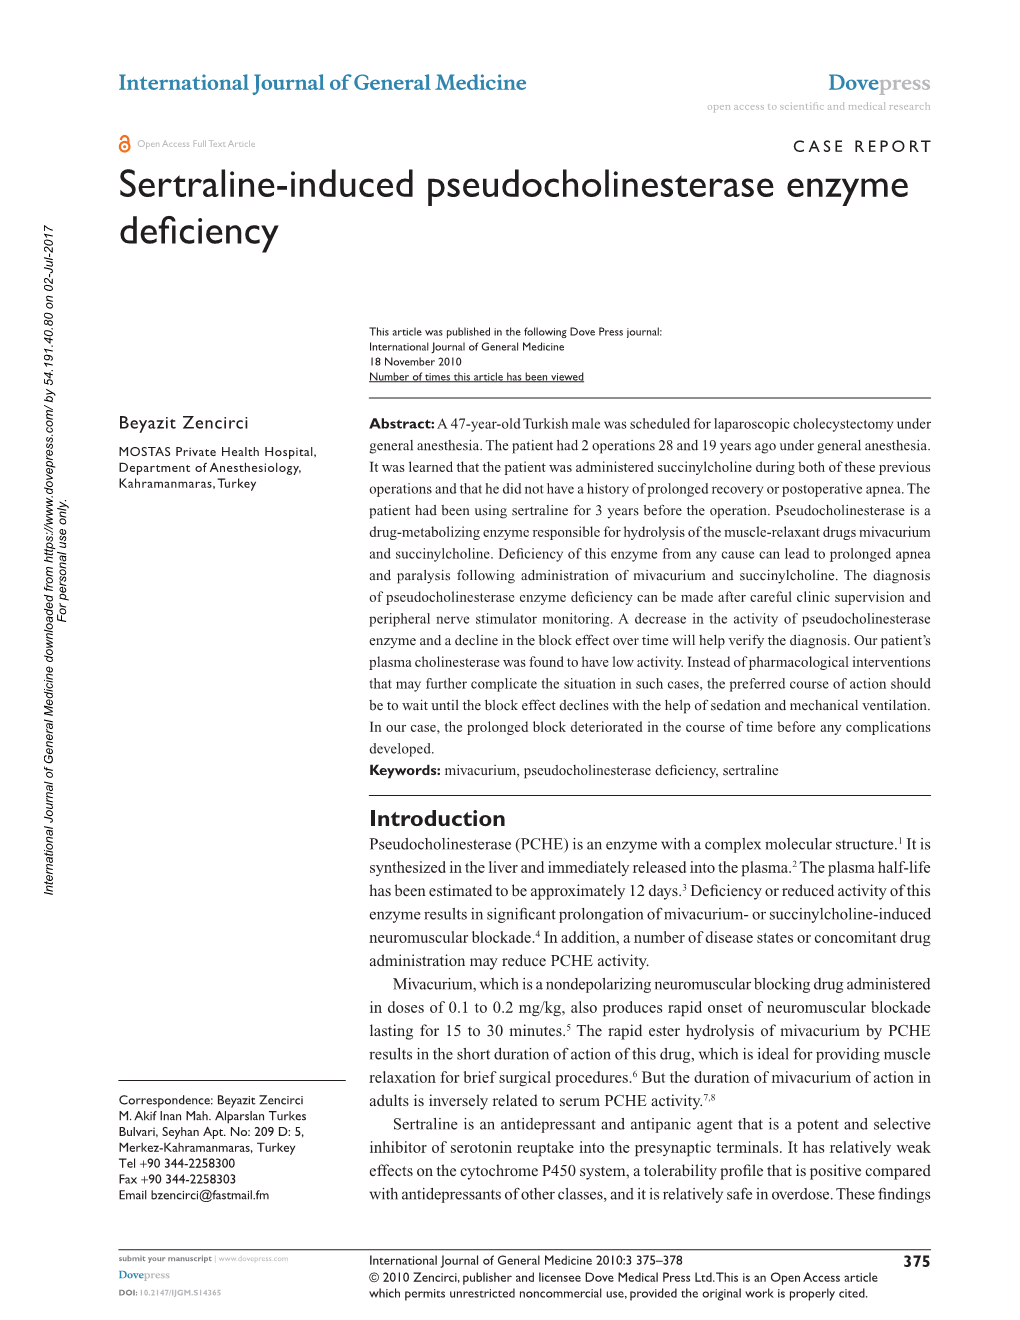 Sertraline-Induced Pseudocholinesterase Enzyme Deficiency